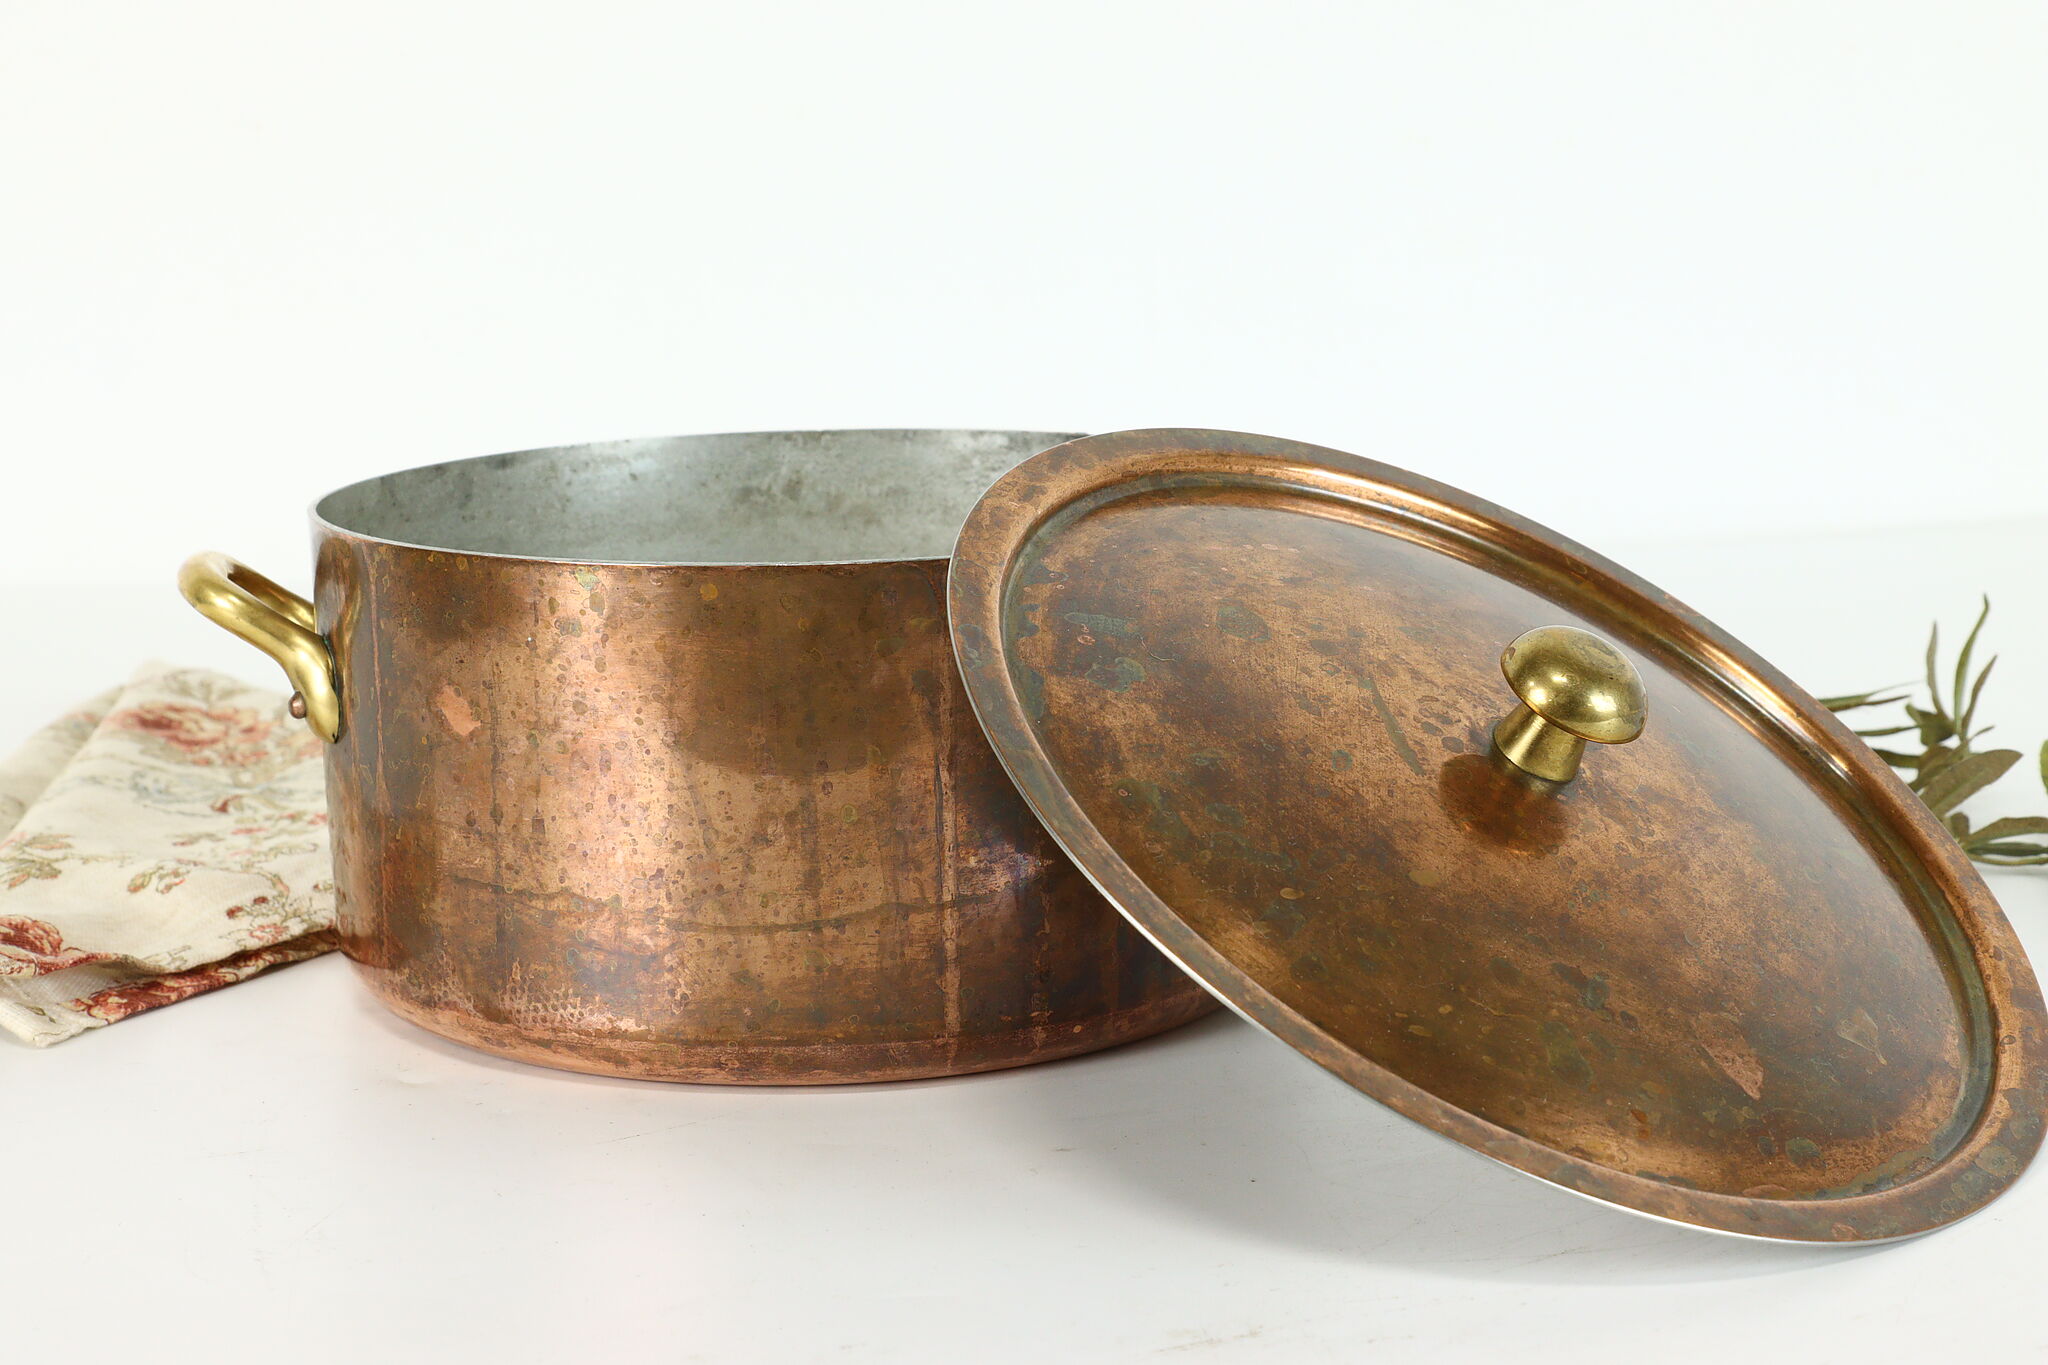 All about brass handles – Vintage French Copper